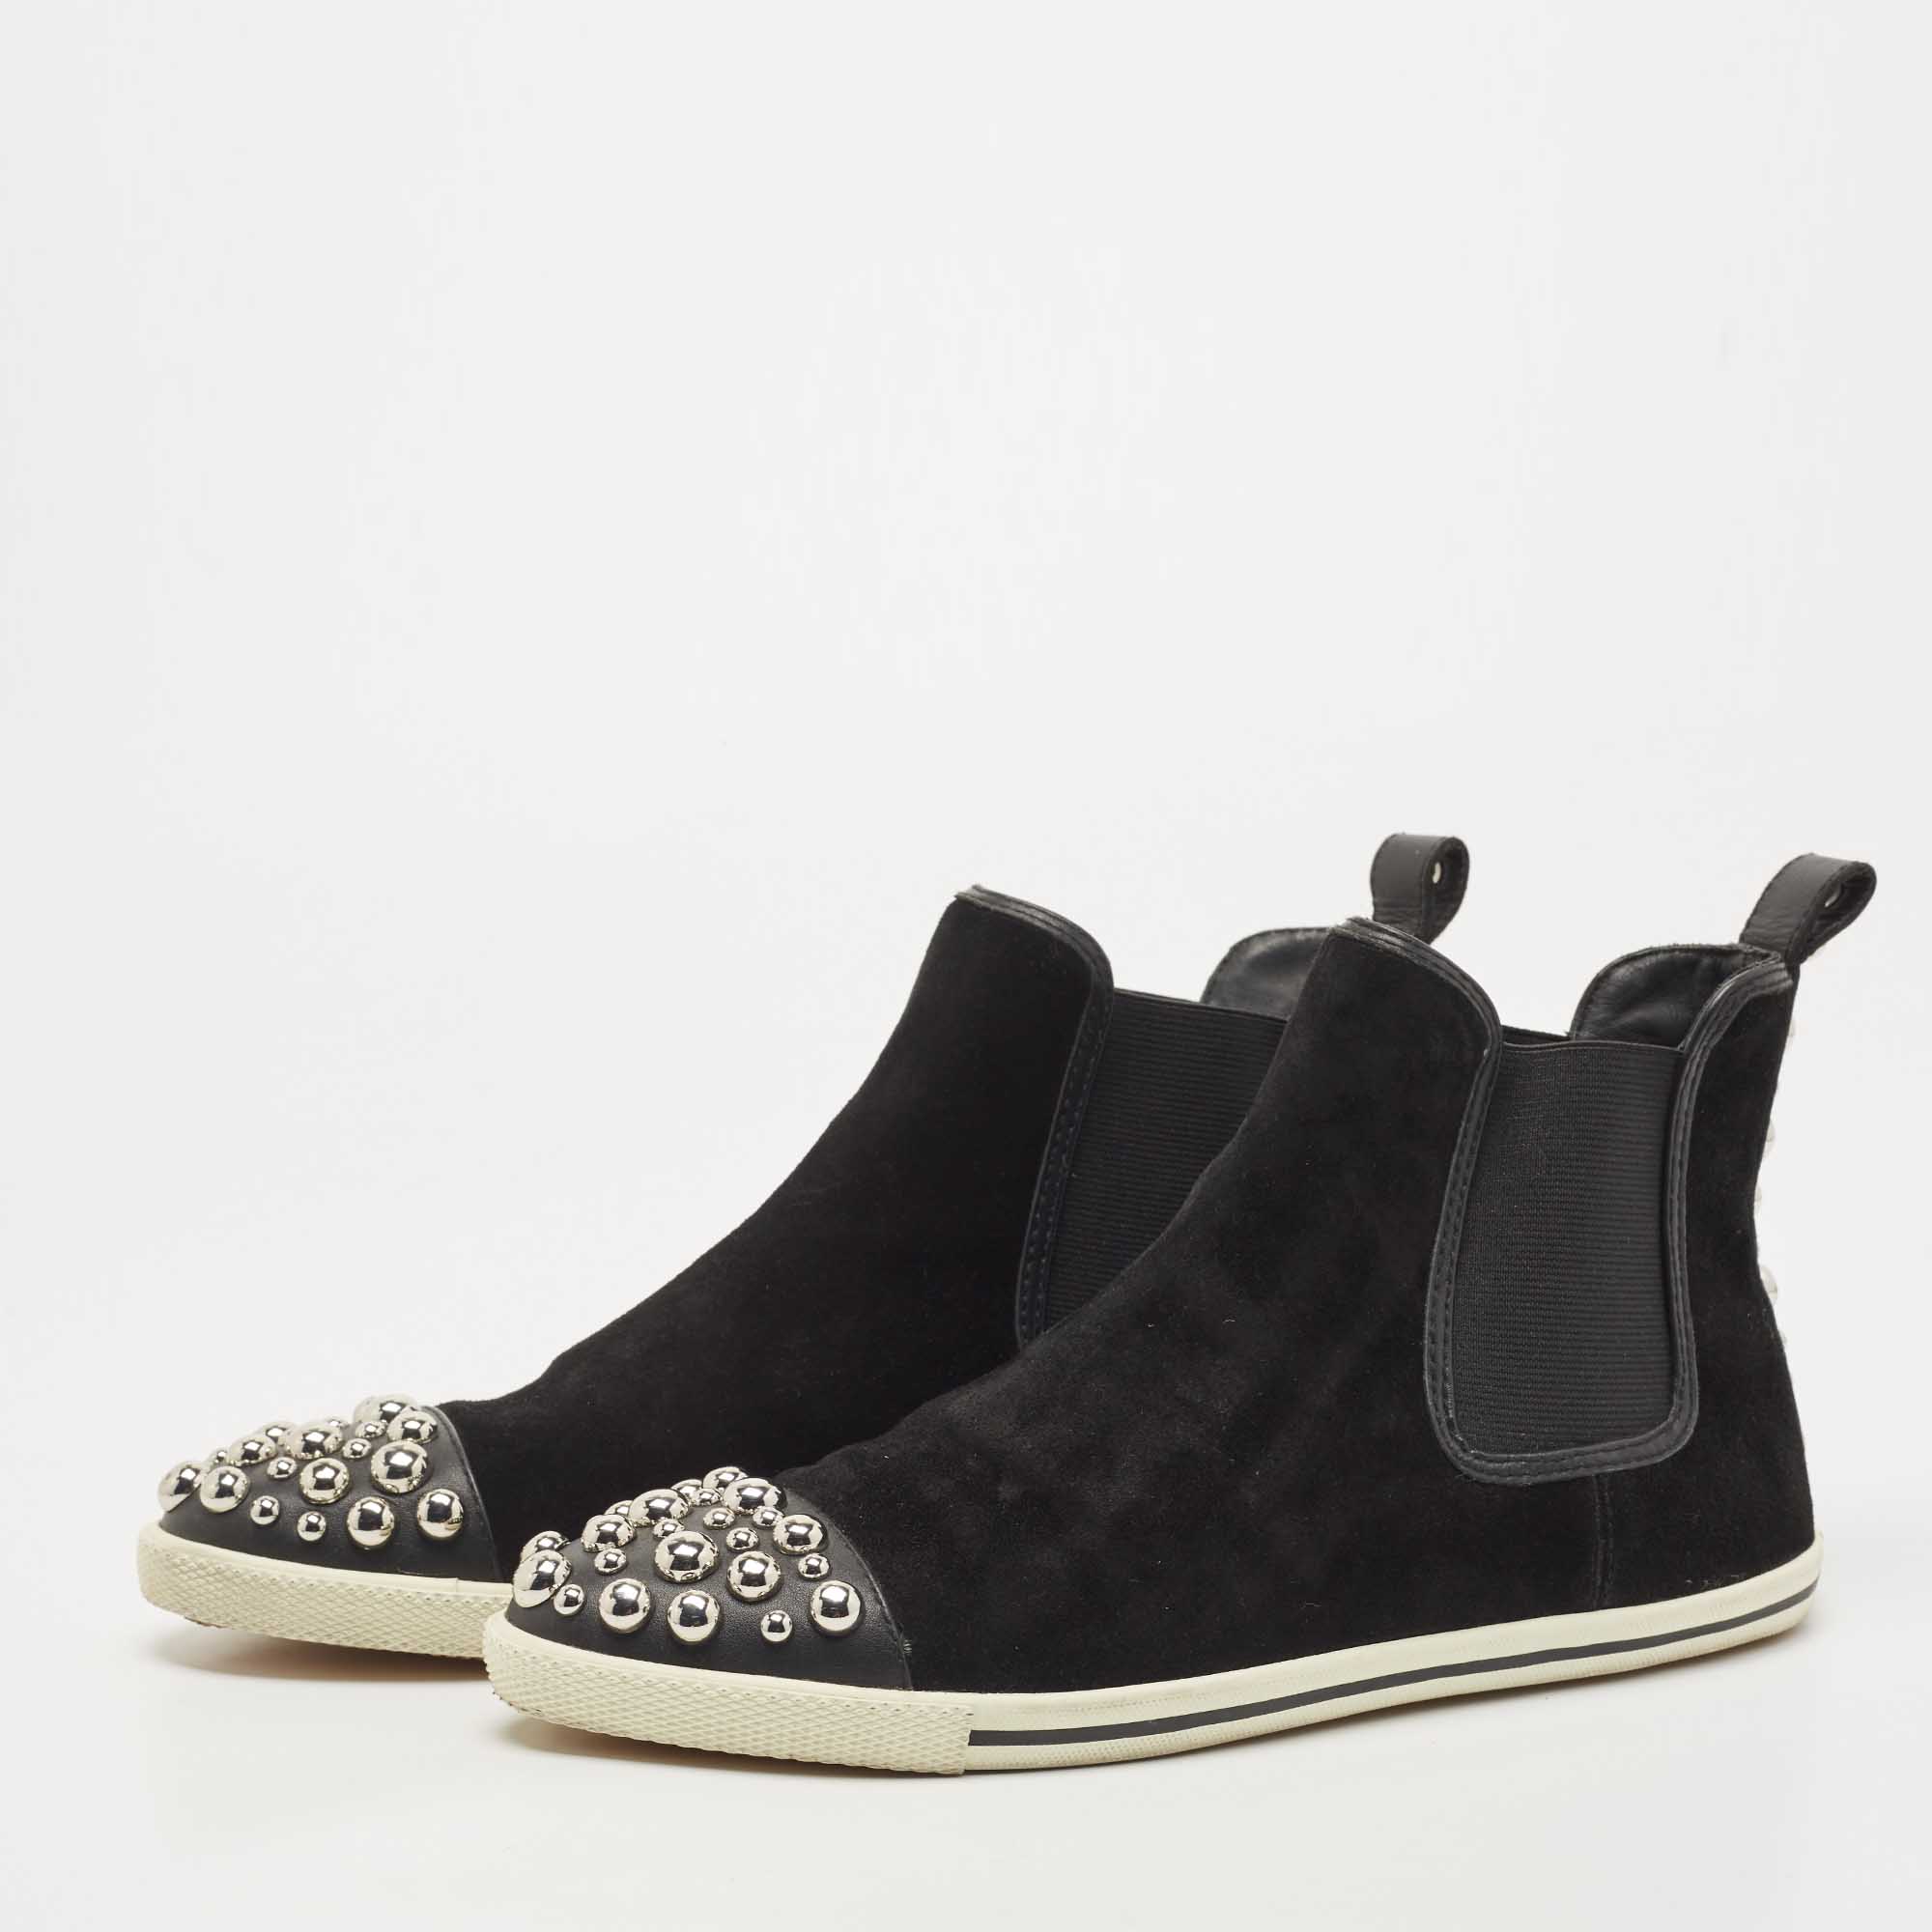 

Marc by Marc Jacobs Black Suede Studded High Top Sneakers Size